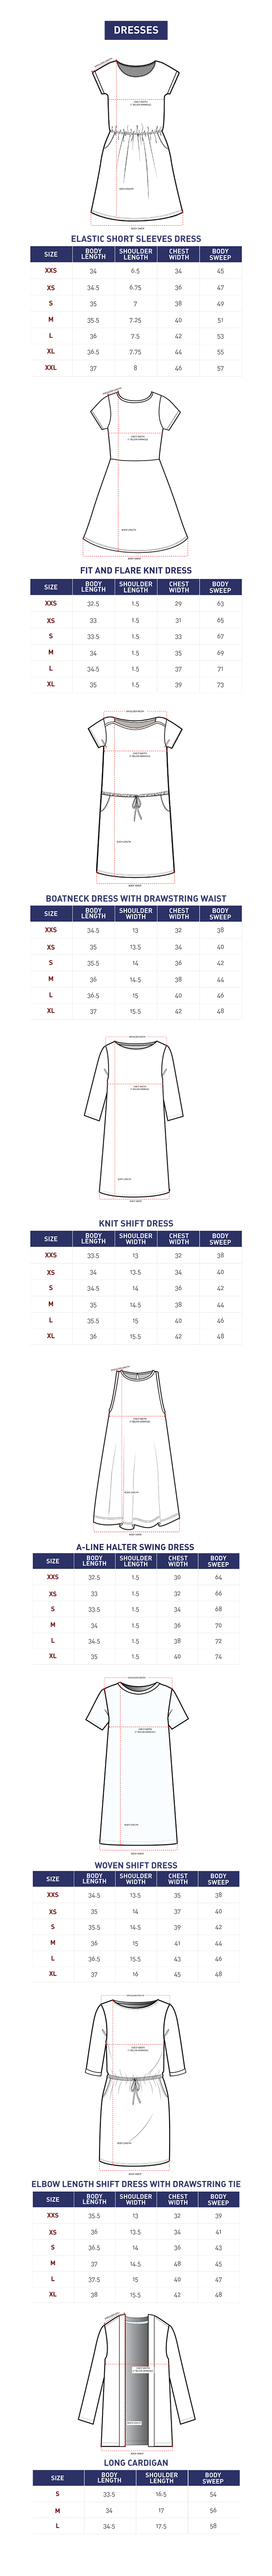 Us Polo Assn Baby Size Chart